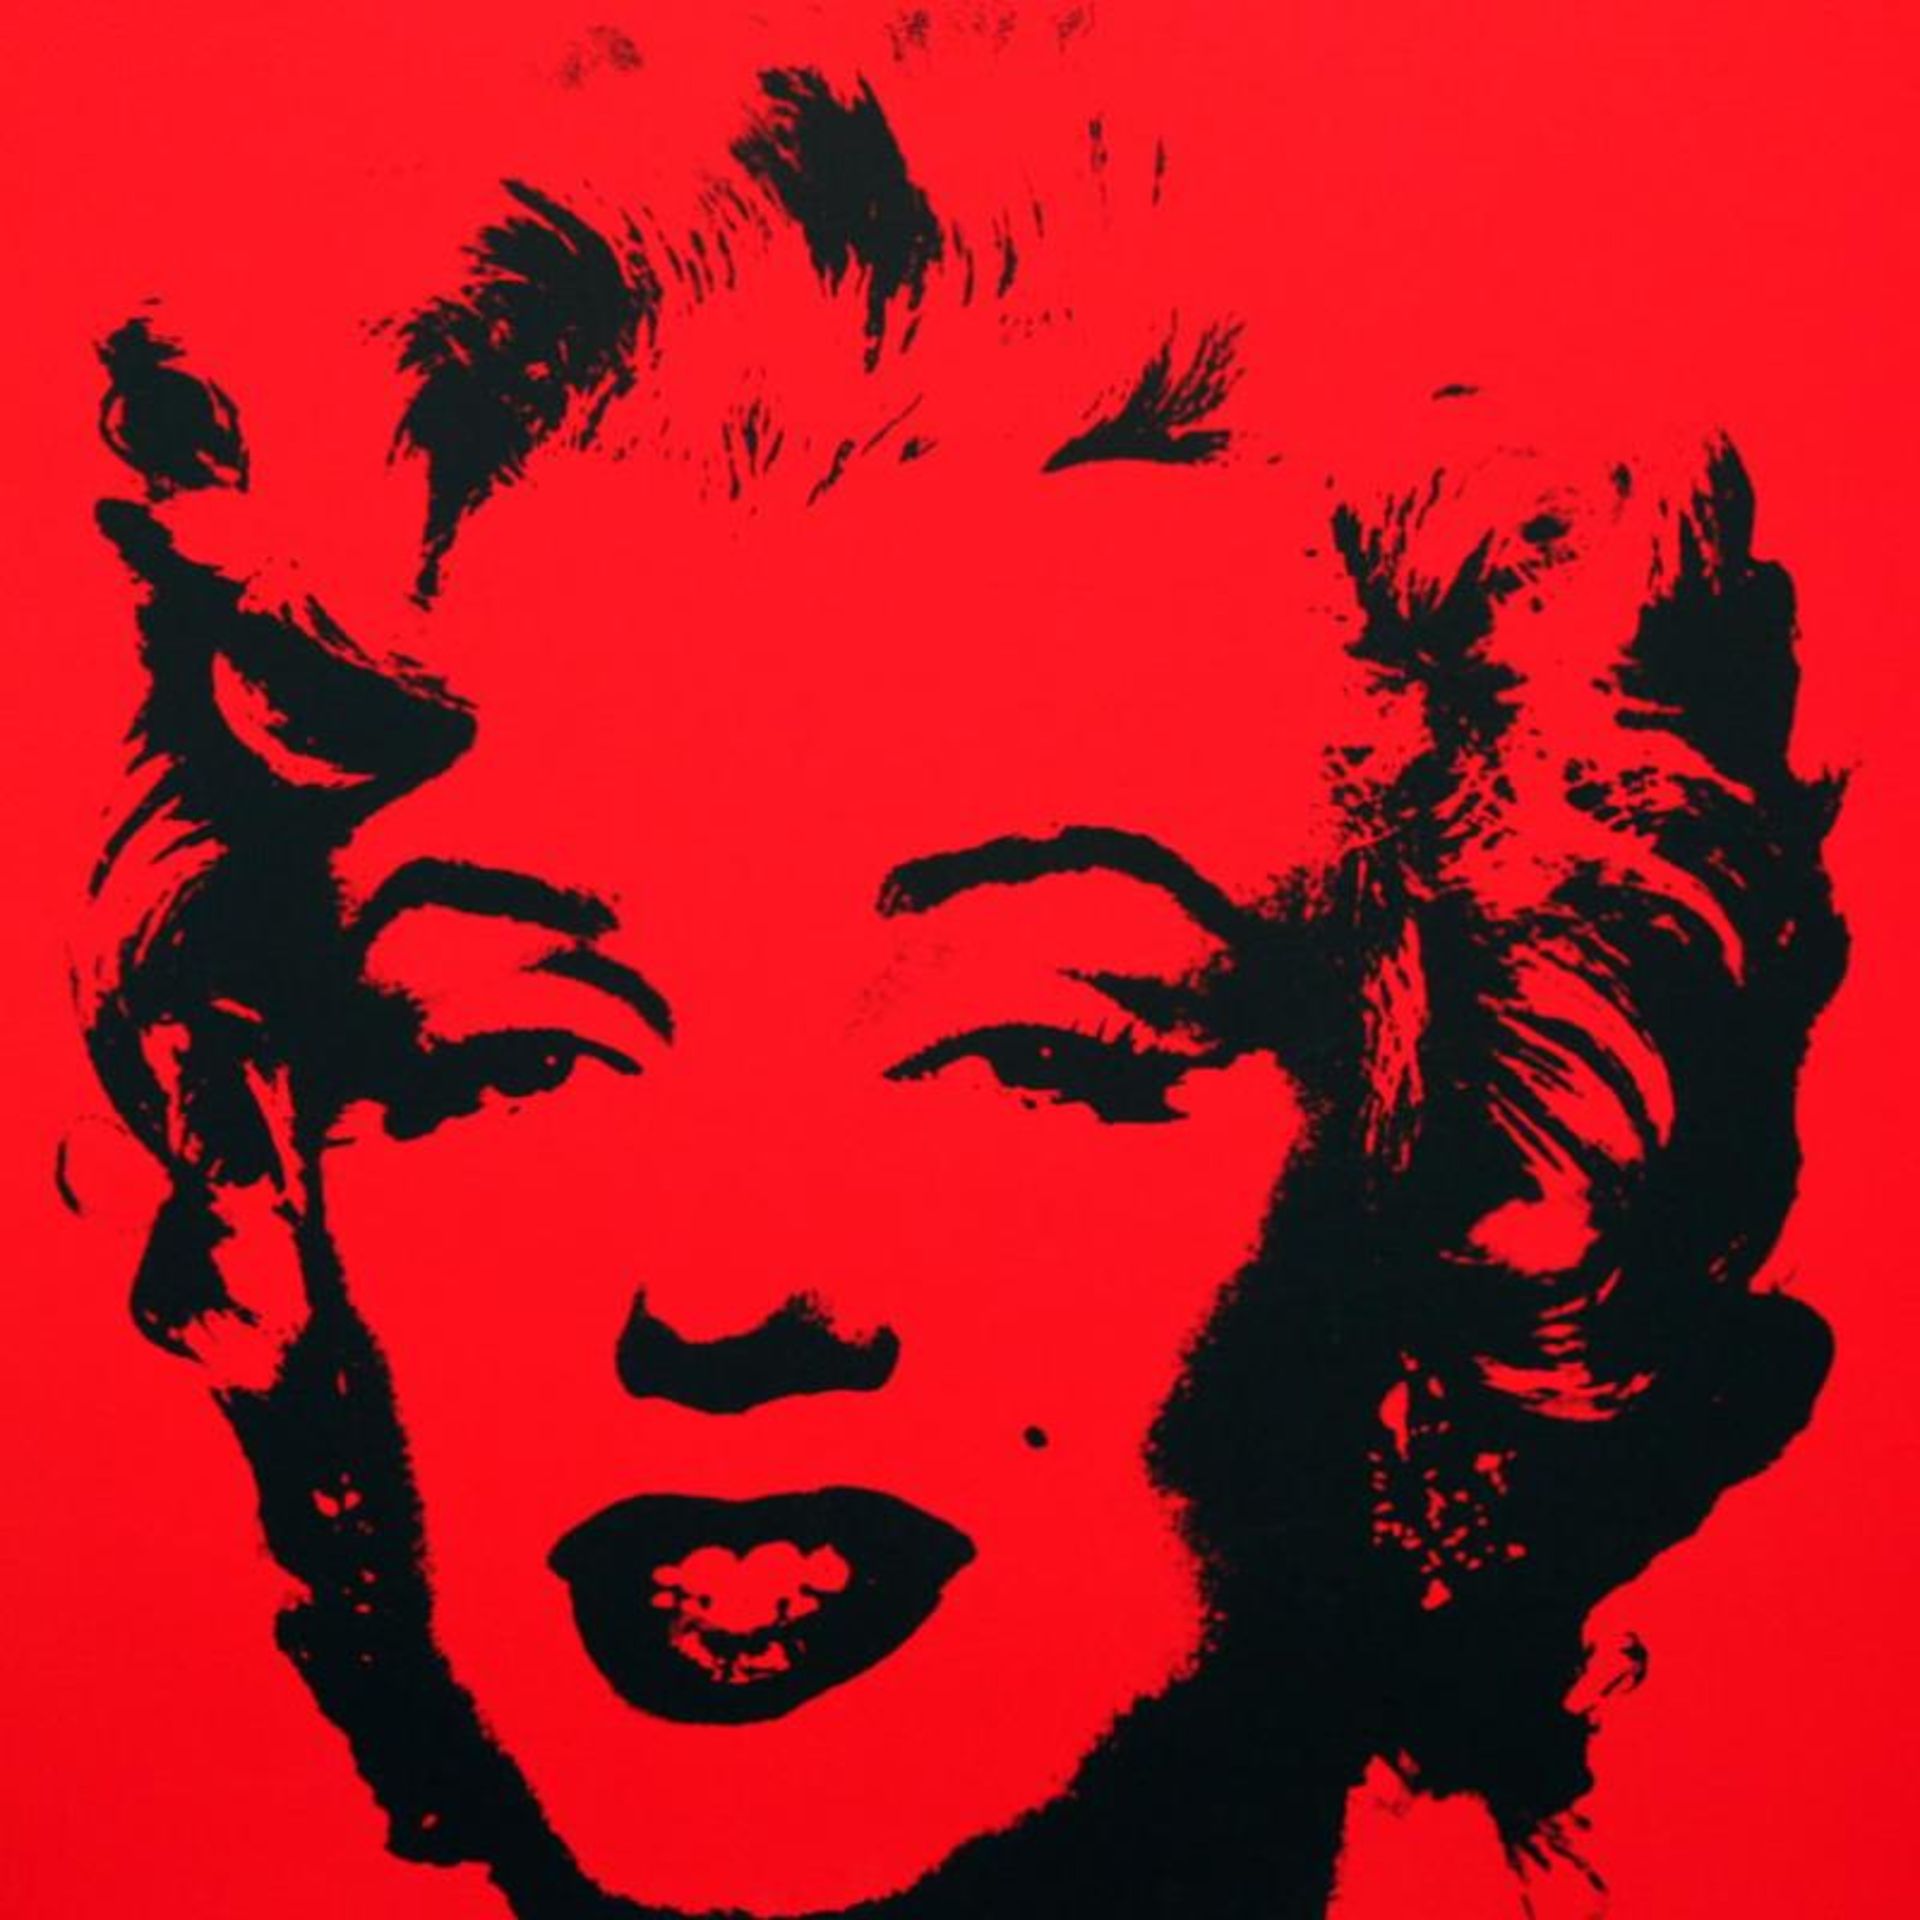 Golden Marilyn 11.43 by Warhol, Andy - Image 2 of 2